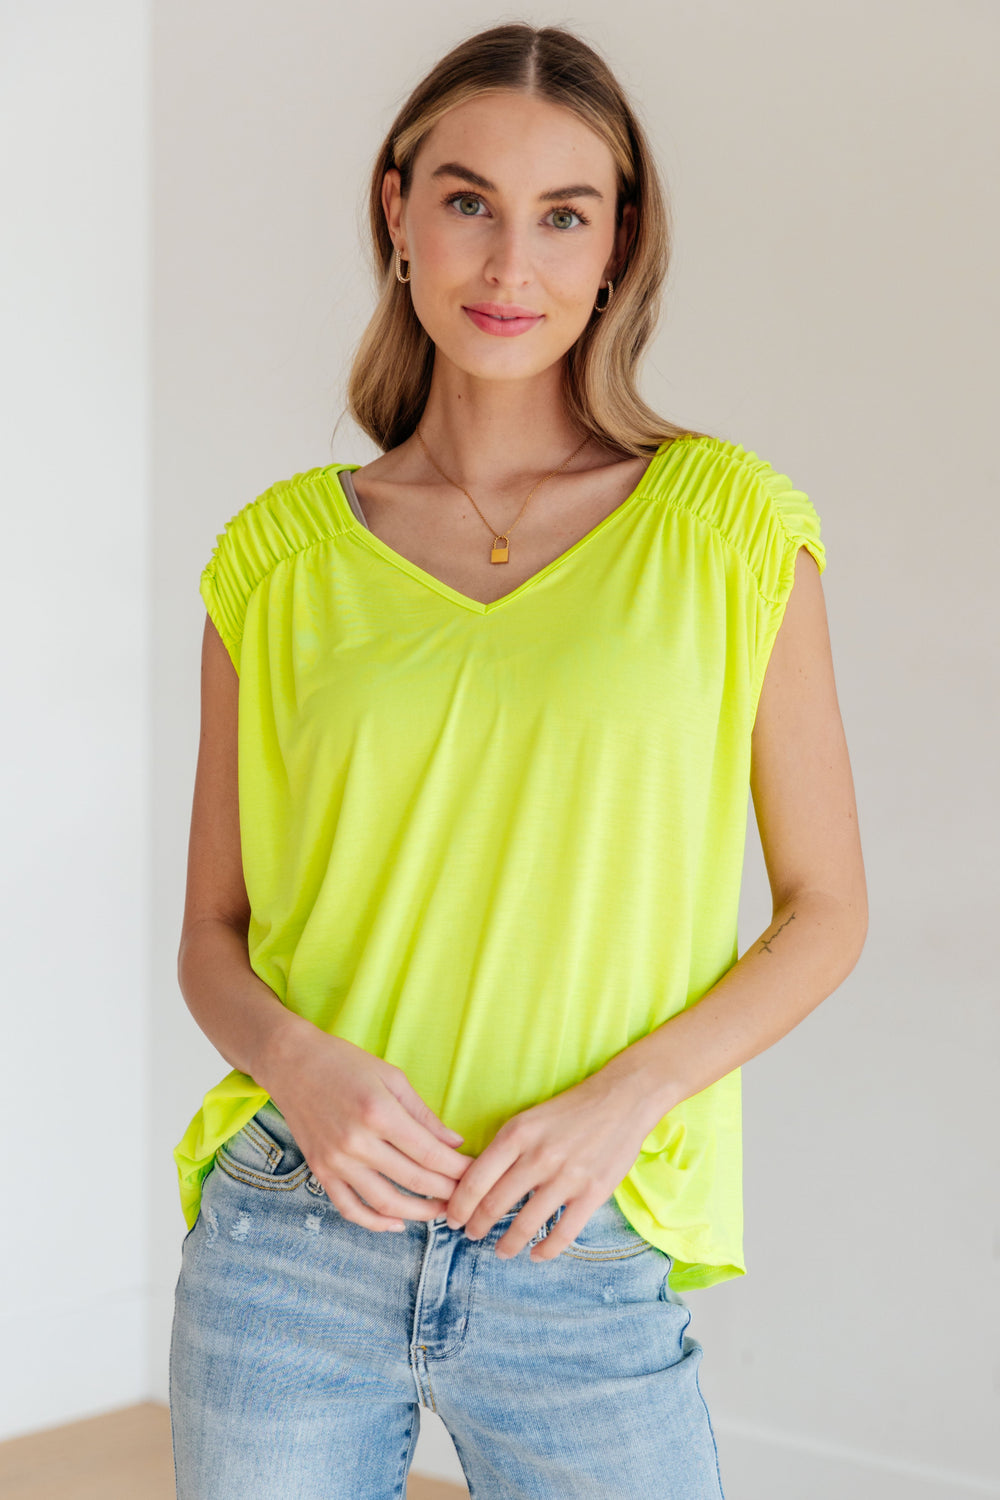 Ruched Cap Sleeve Top in Neon Green-Short Sleeve Tops-Inspired by Justeen-Women's Clothing Boutique in Chicago, Illinois